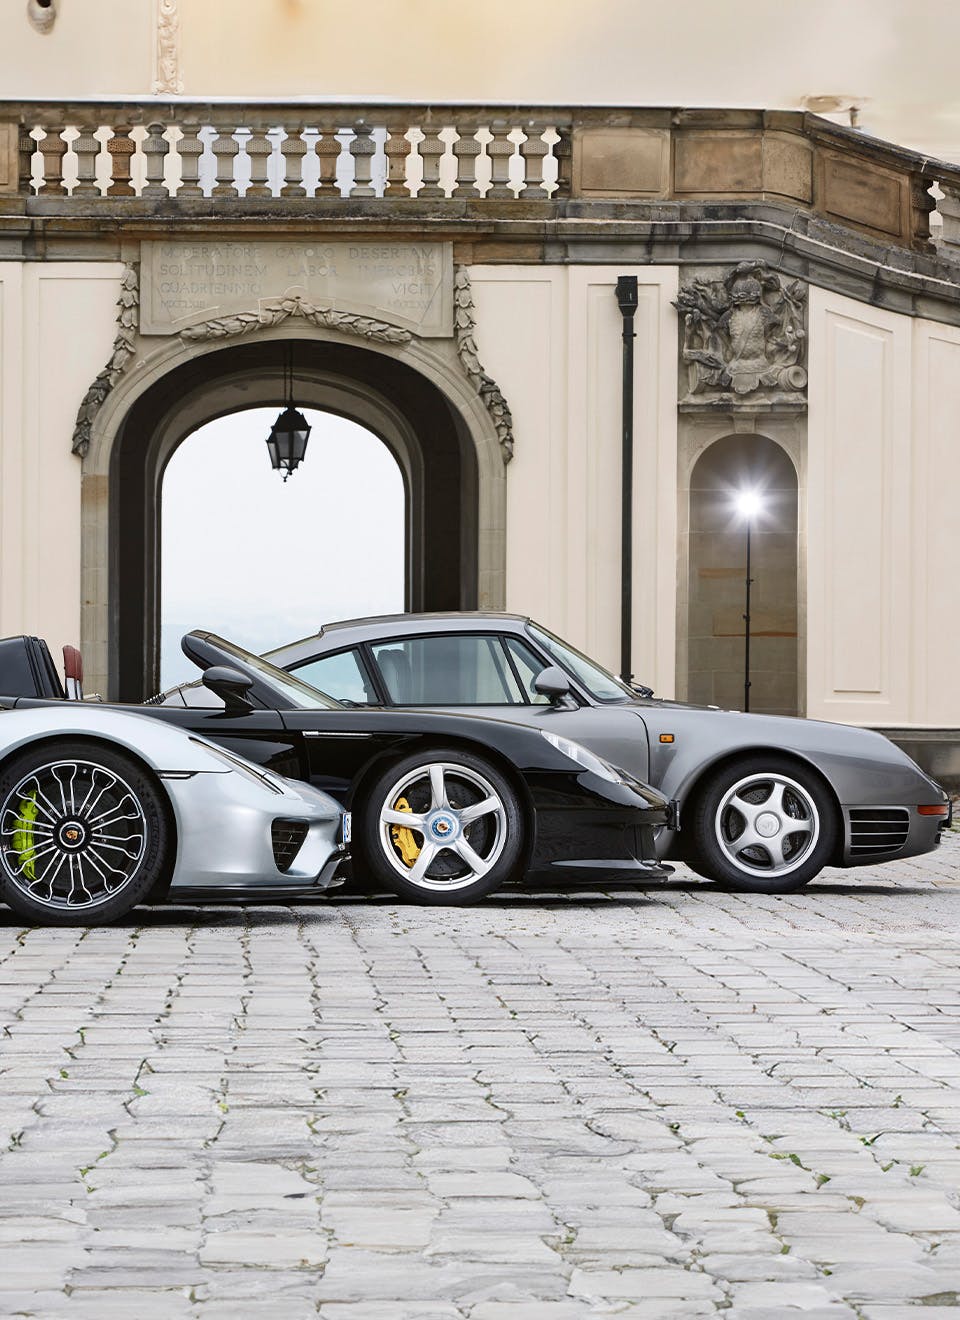 Yet Another Low-Mileage Porsche Carrera GT Has Hit The Market